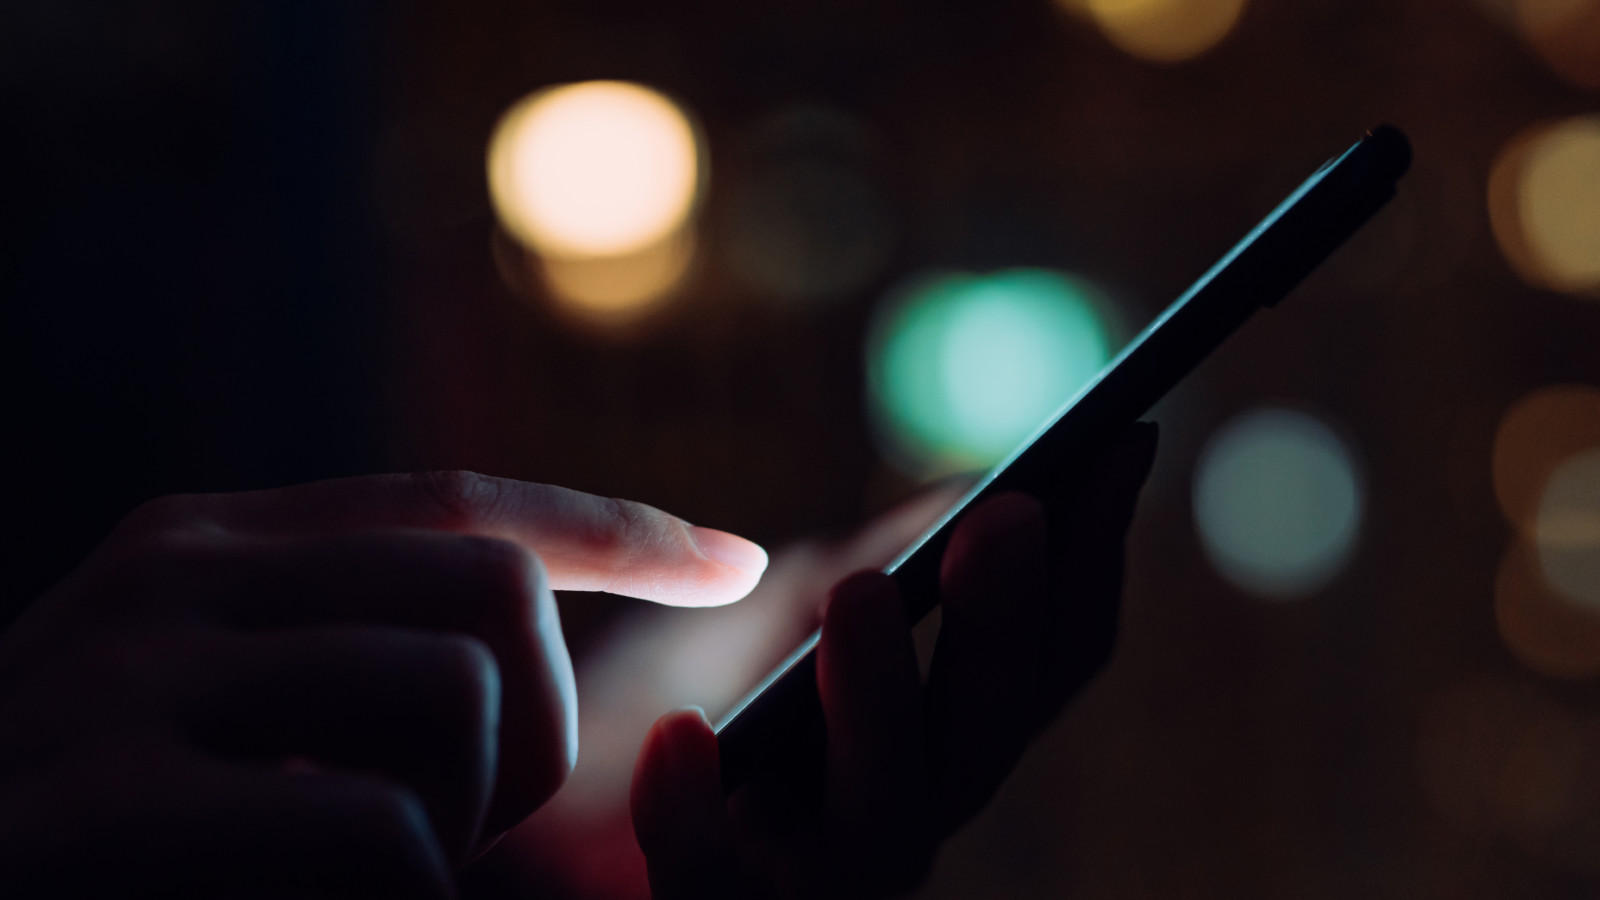 Close up of woman's hand using smartphone in the dark, against illuminated city light.